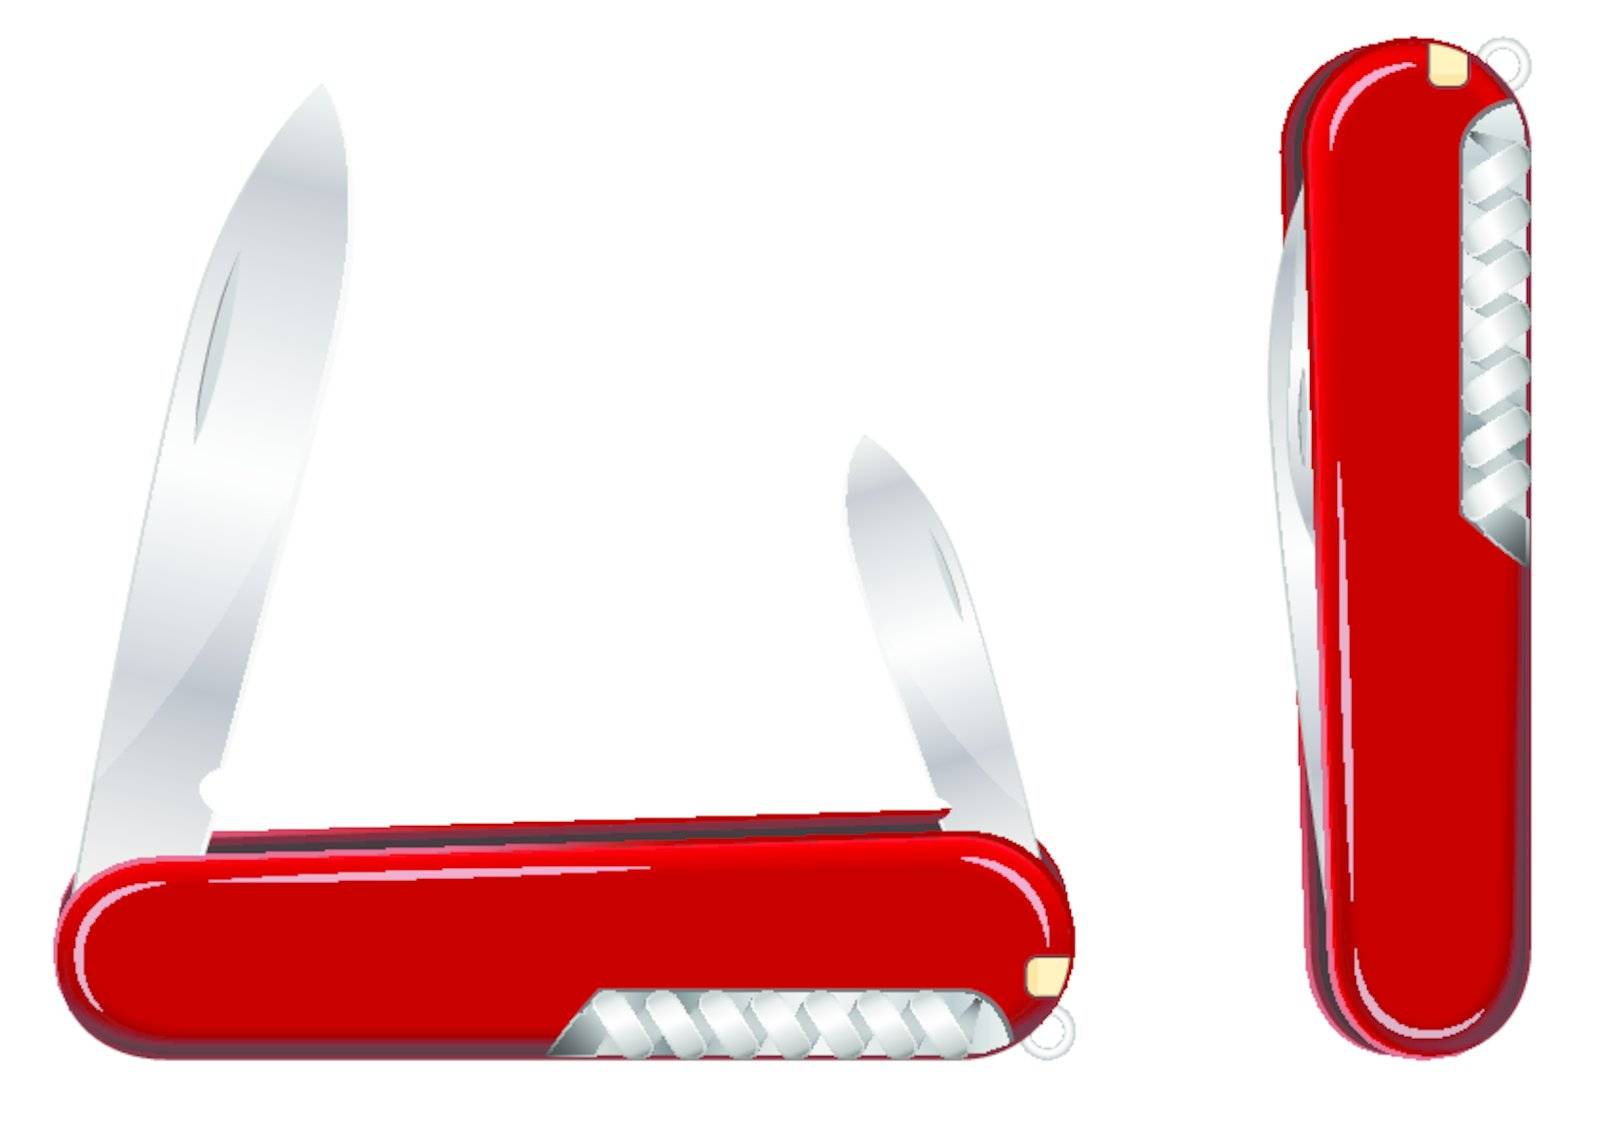 Swiss Army Knife. Vector by SolanD